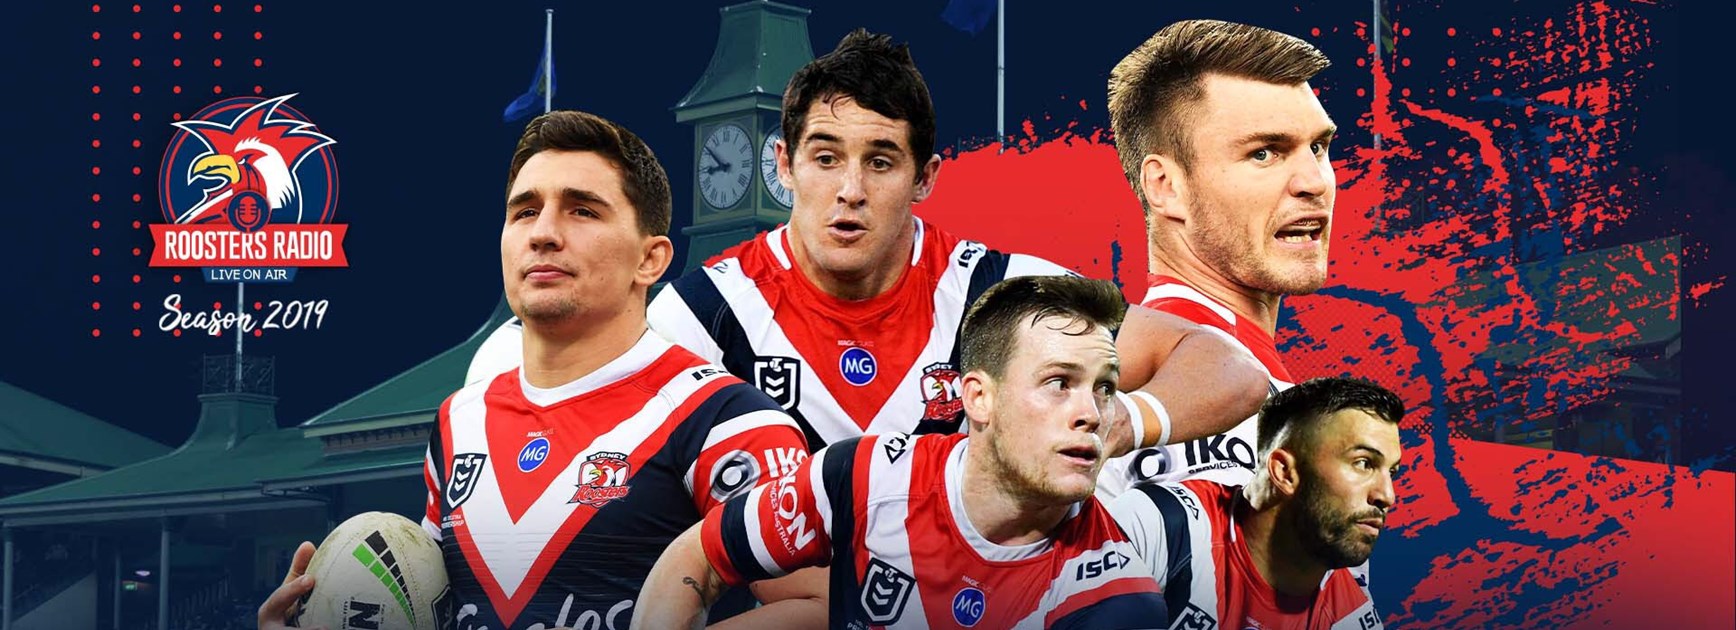 Roosters Radio | Live From Captains Club